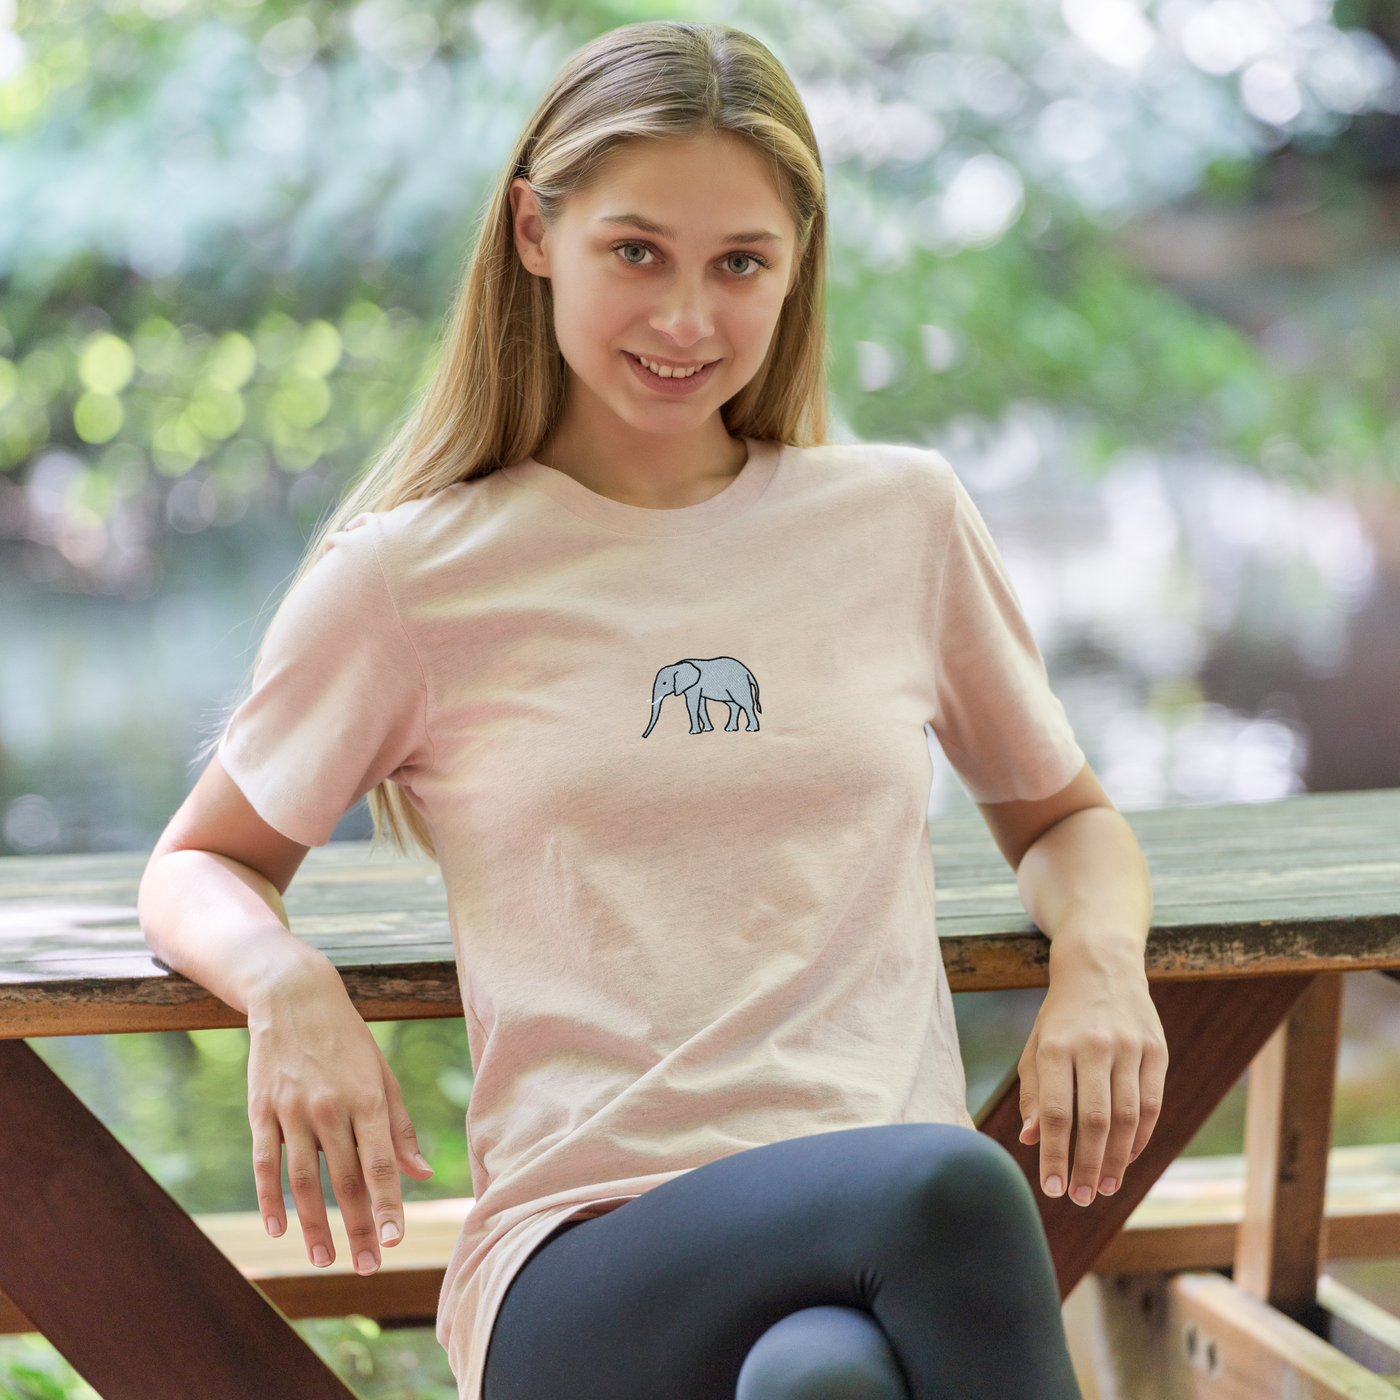 Bobby's Planet Women's Embroidered Elephant T-Shirt from African Animals Collection in Heather Prism Peach Color#color_heather-prism-peach